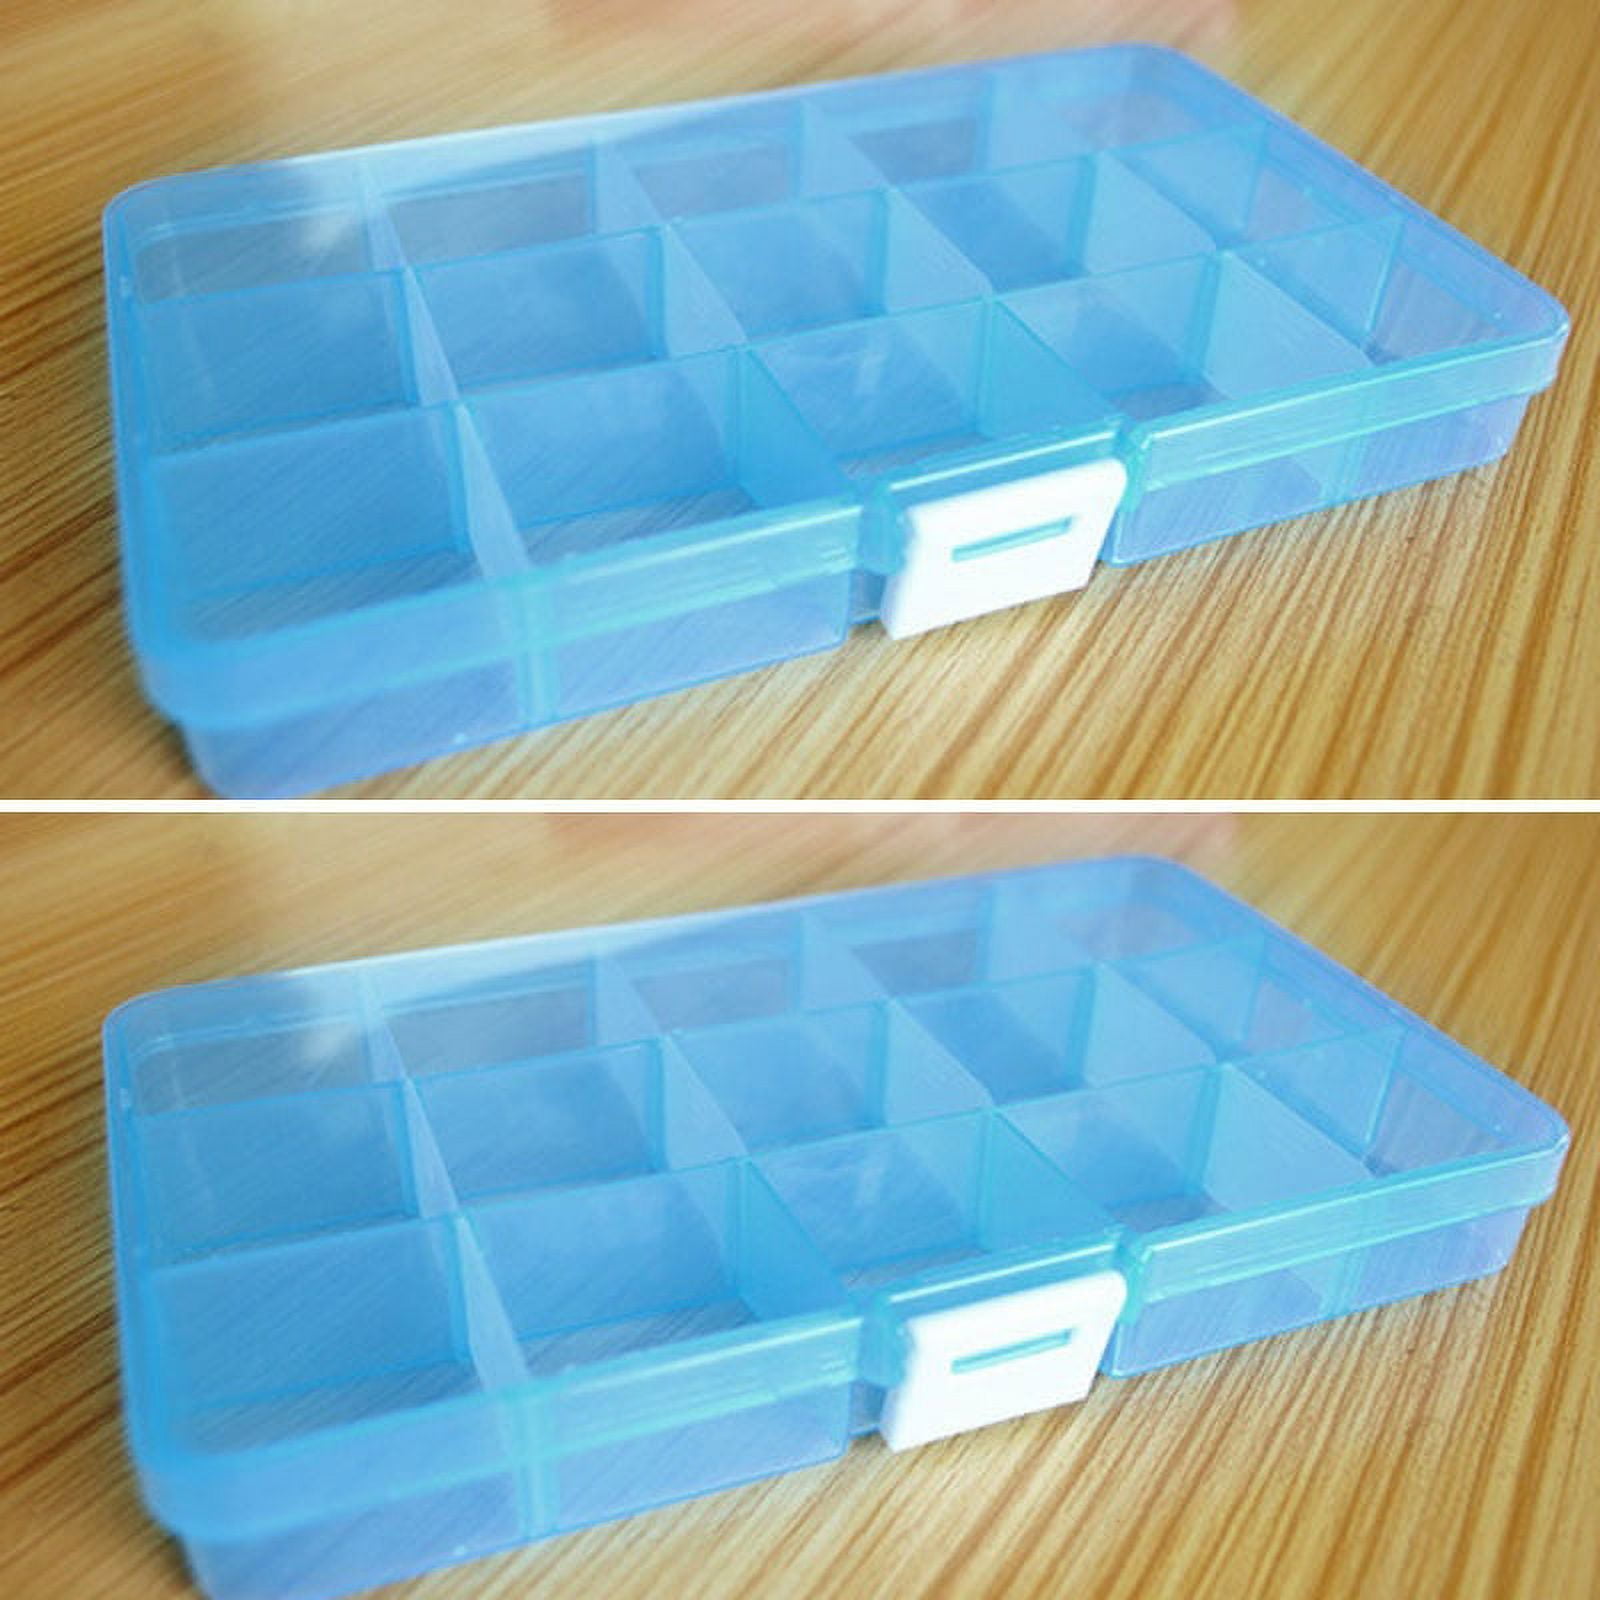 yueton 2 Pcs 10 Compartment Slot Adjustable Jewelry Bead Organizer Box Storage Container Case (Clear+Blue)